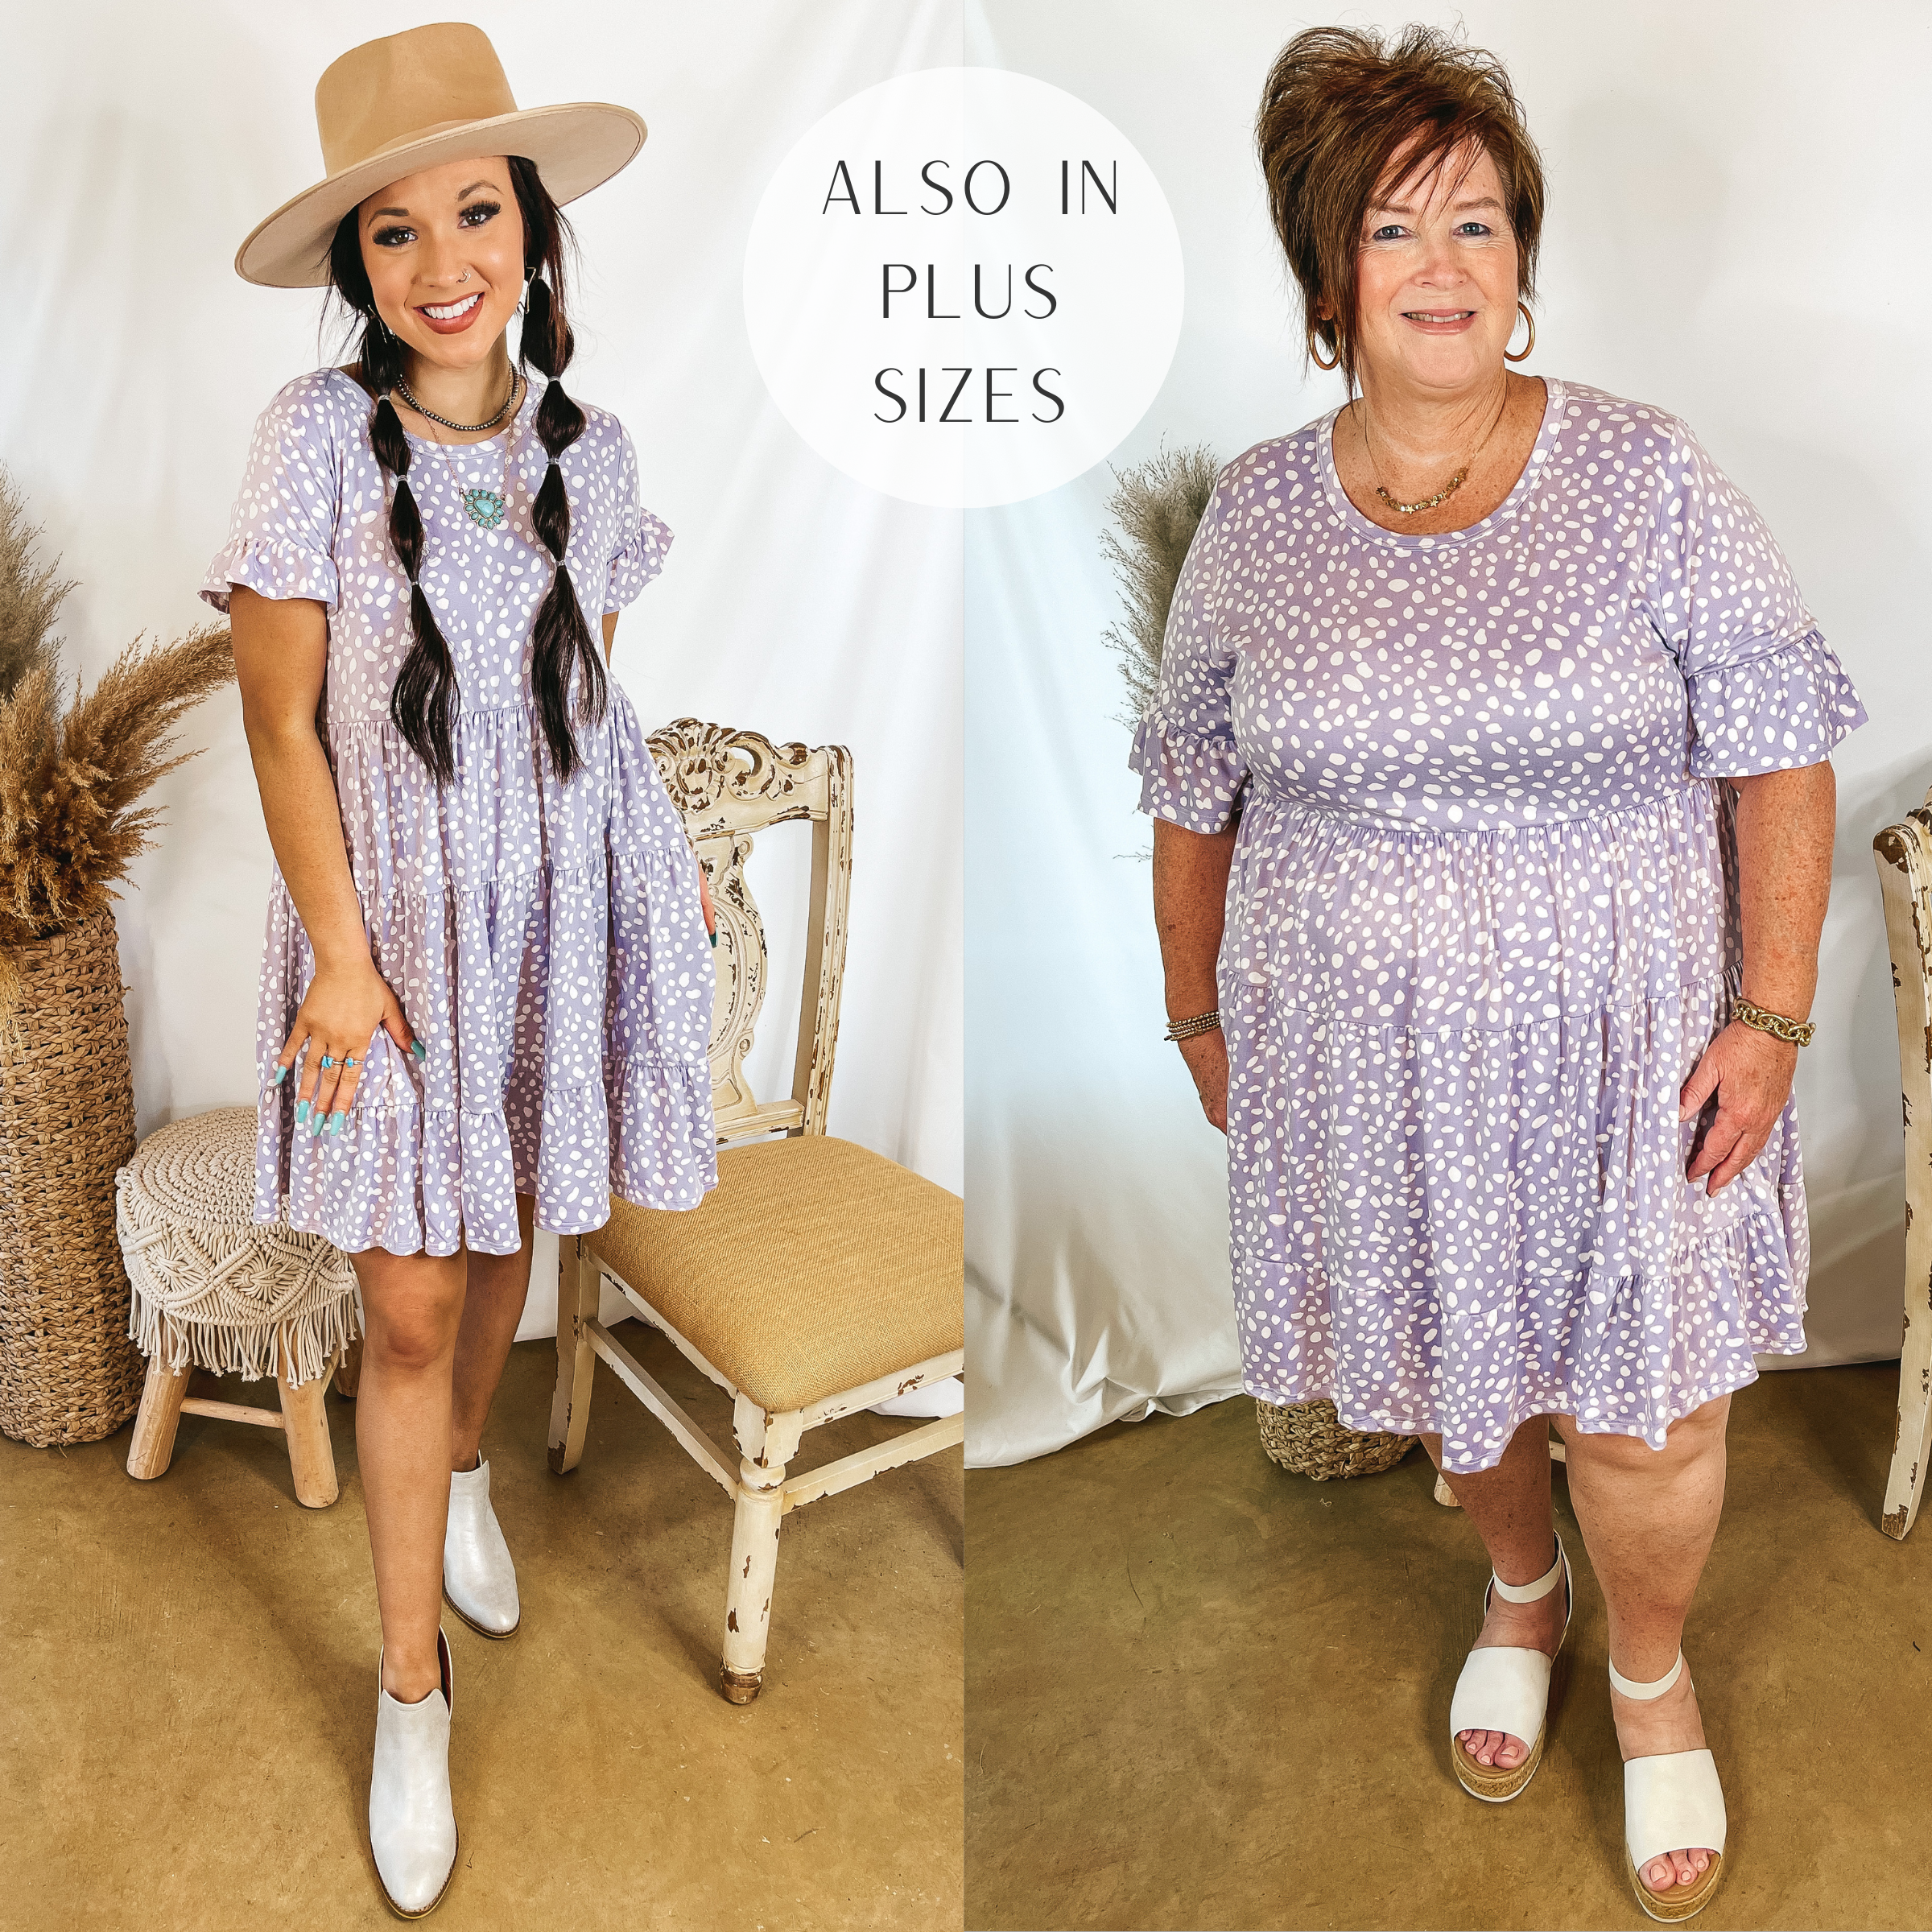 Models are wearing a purple babydoll dress. The dress has a white dotted print. Size small model has it paired with white metallic booties and a tan hat. Plus size model has it paired with white sandals and gold jewelry.